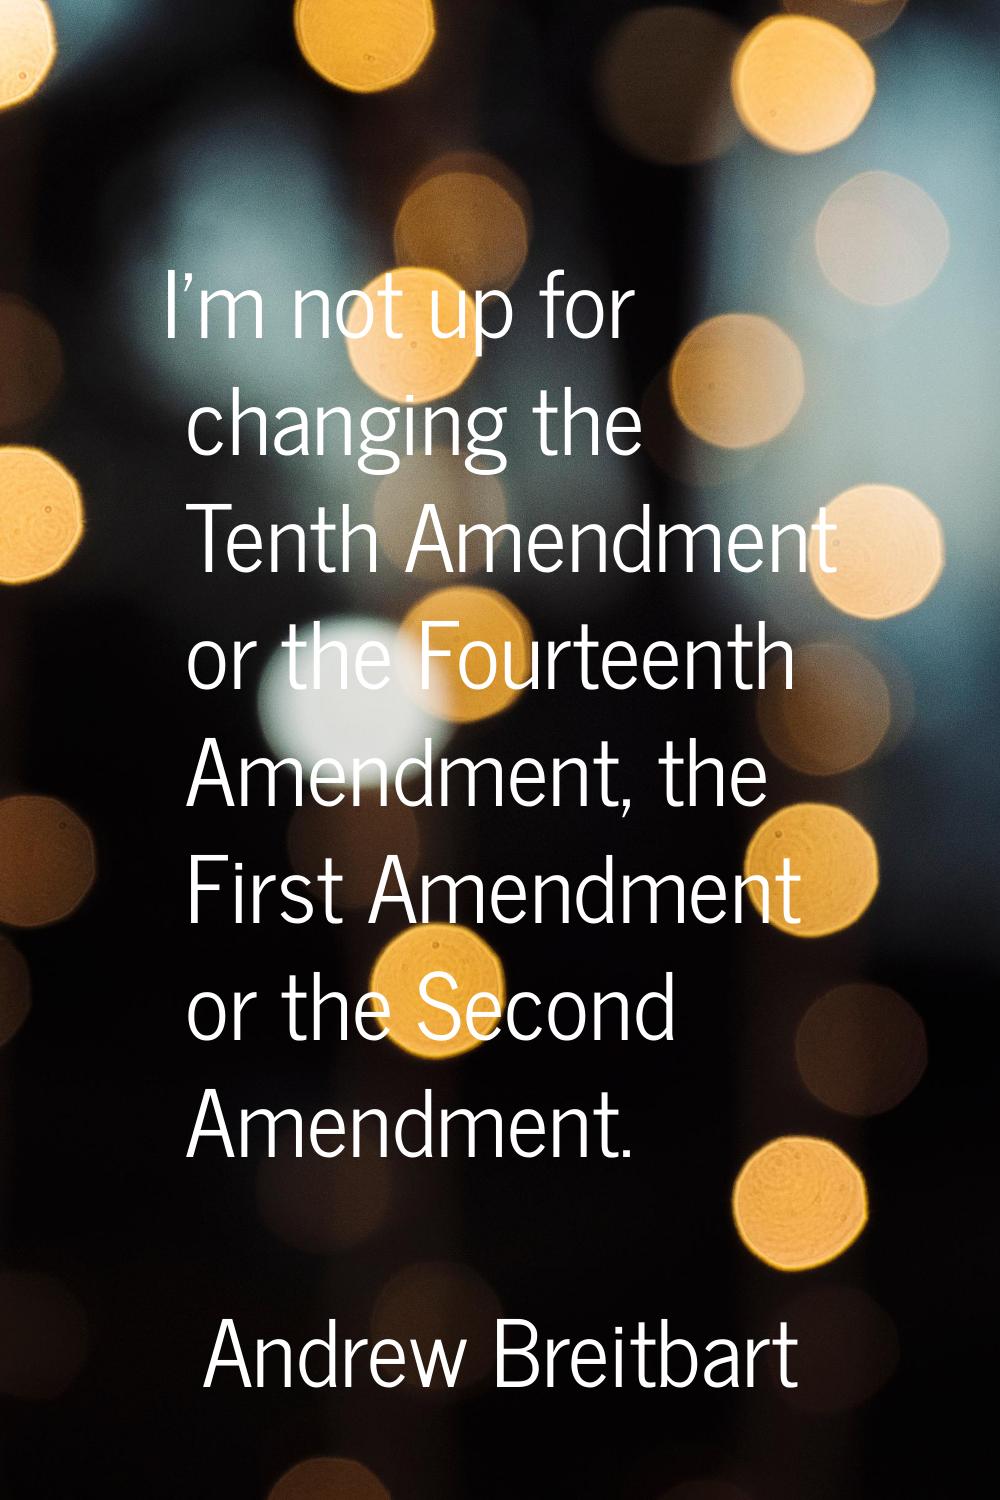 I'm not up for changing the Tenth Amendment or the Fourteenth Amendment, the First Amendment or the